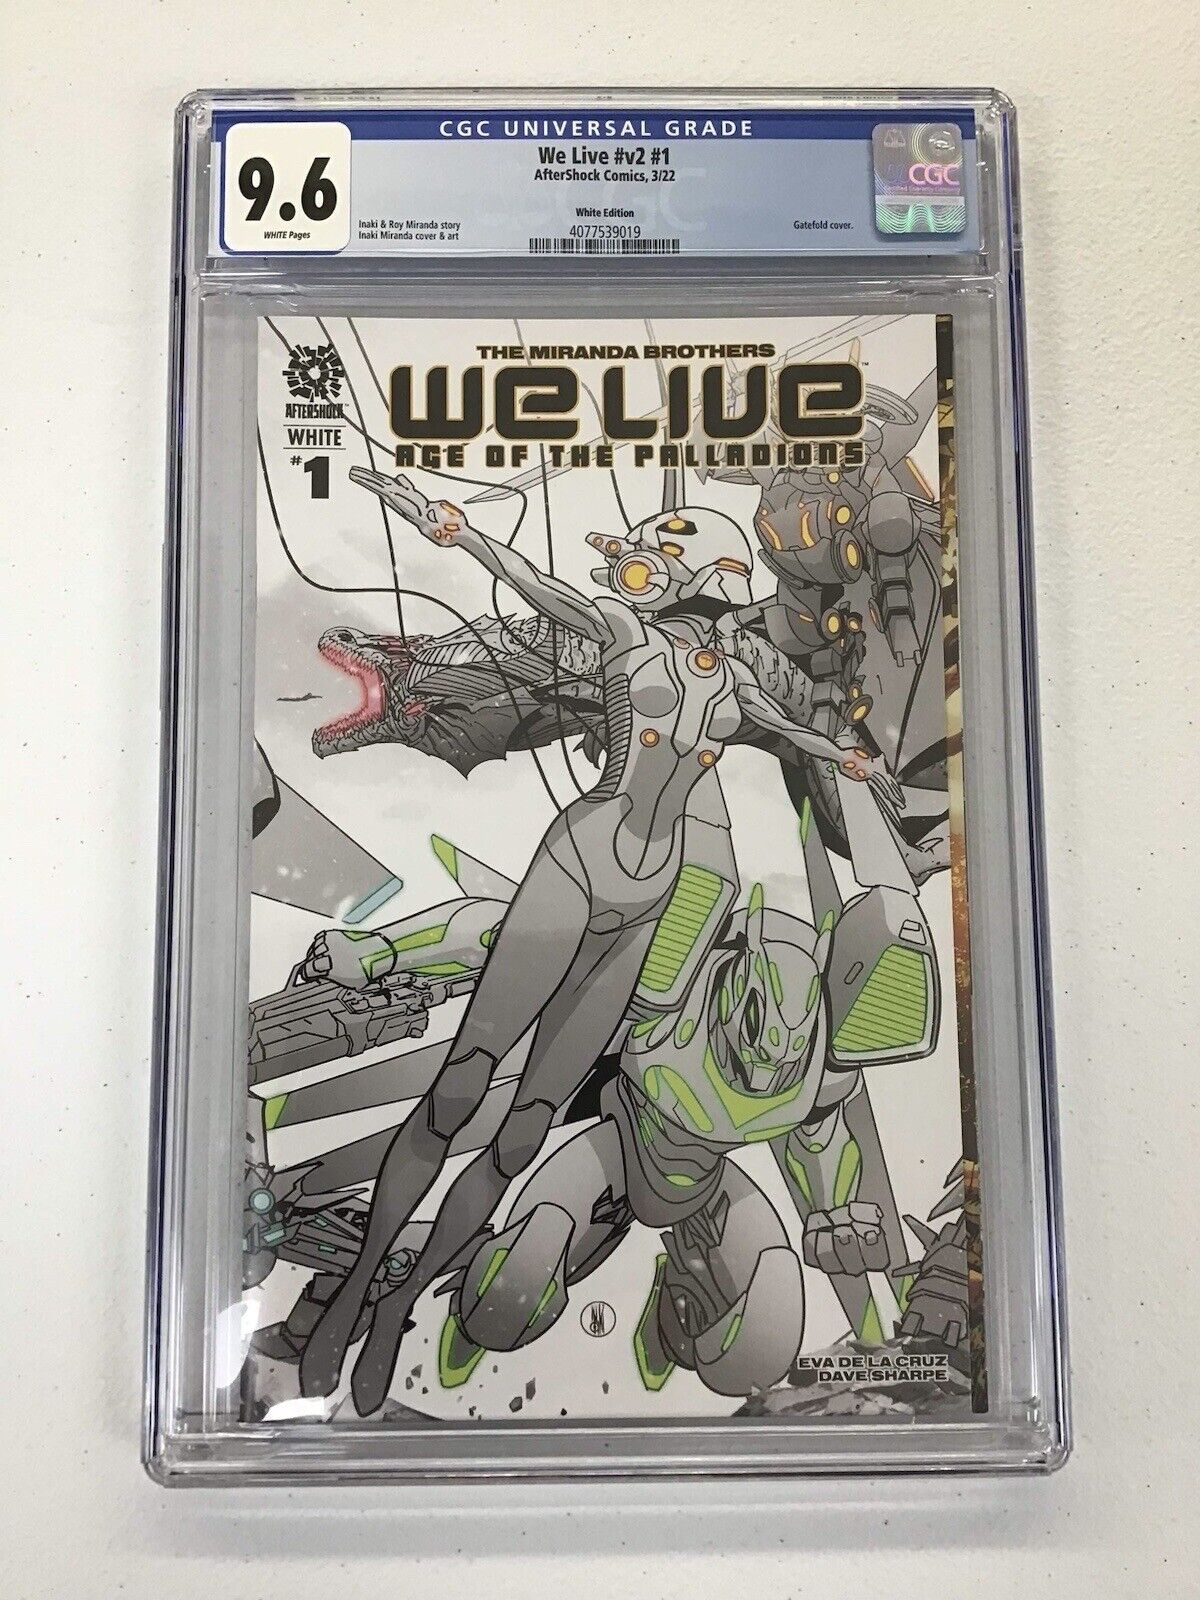 We Live Age of the Palladions #1, White Main Cover A, CGC 9.6